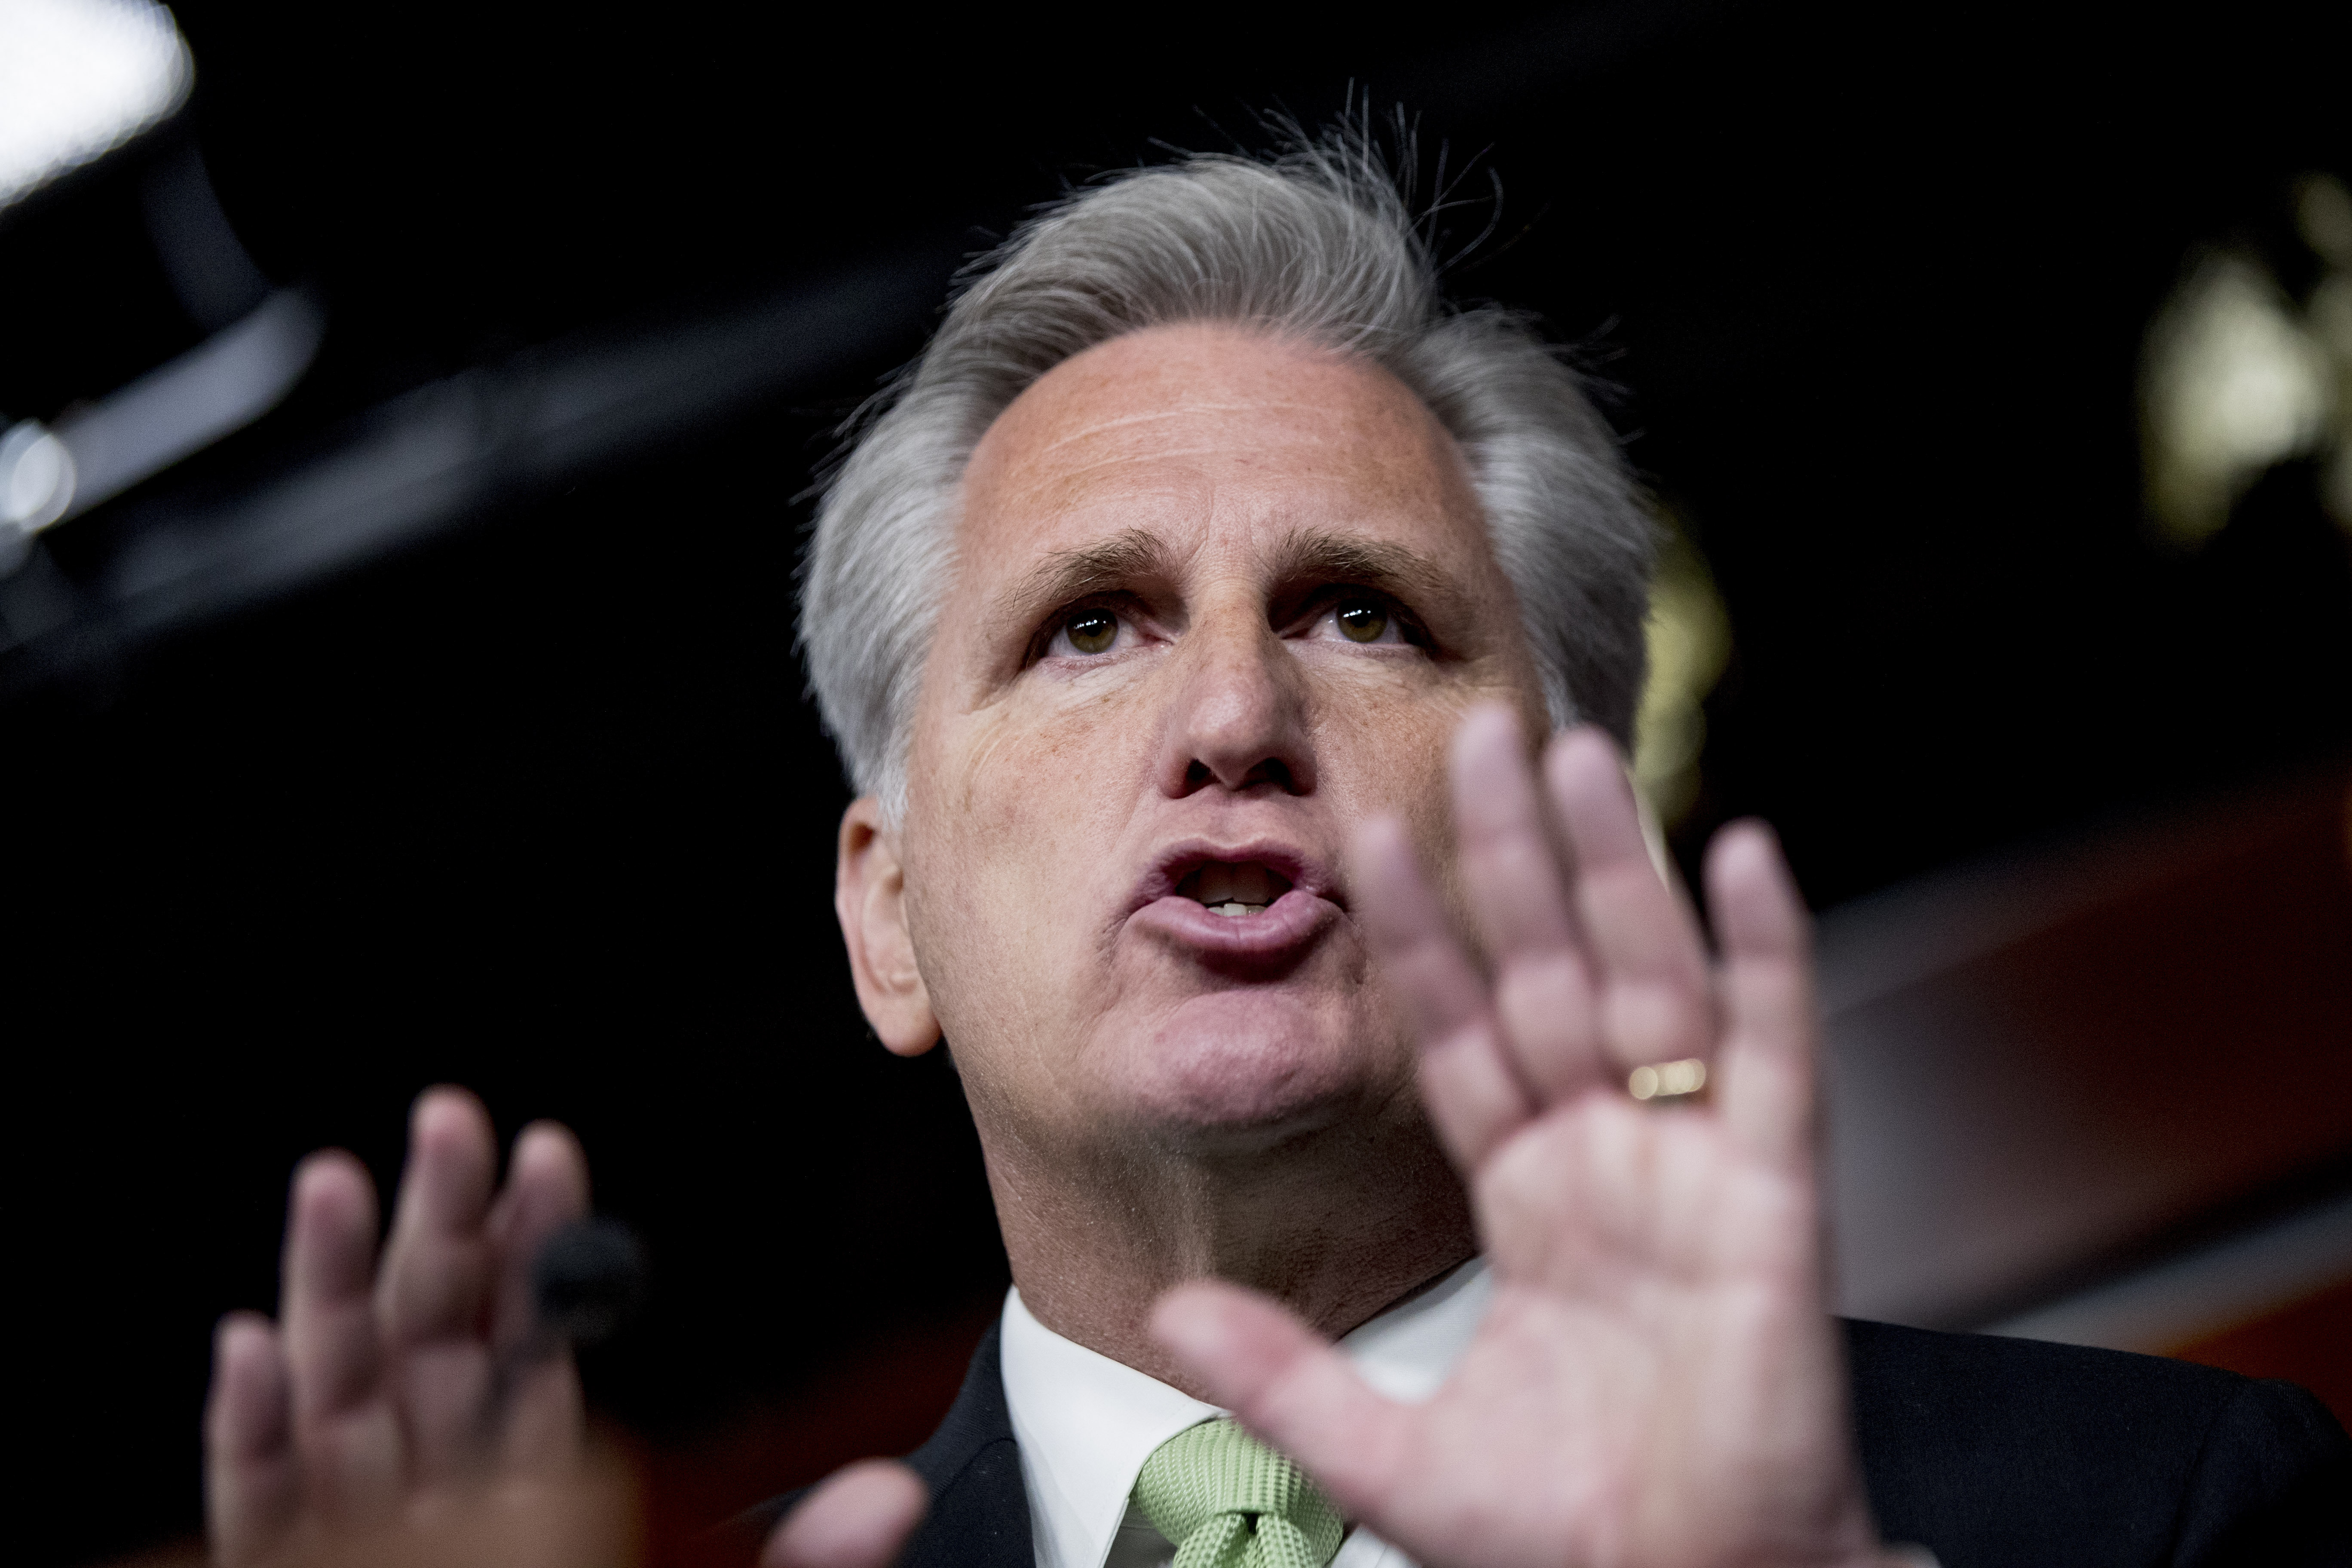 House Republican Leader Kevin McCarthy, R-Calif., speaks to reporters after Speaker of the House Nancy Pelosi, D-Calif., announced earlier that the House is moving forward to draft articles of impeachment against President Donald Trump at the Capitol in Washington, on Thursday.